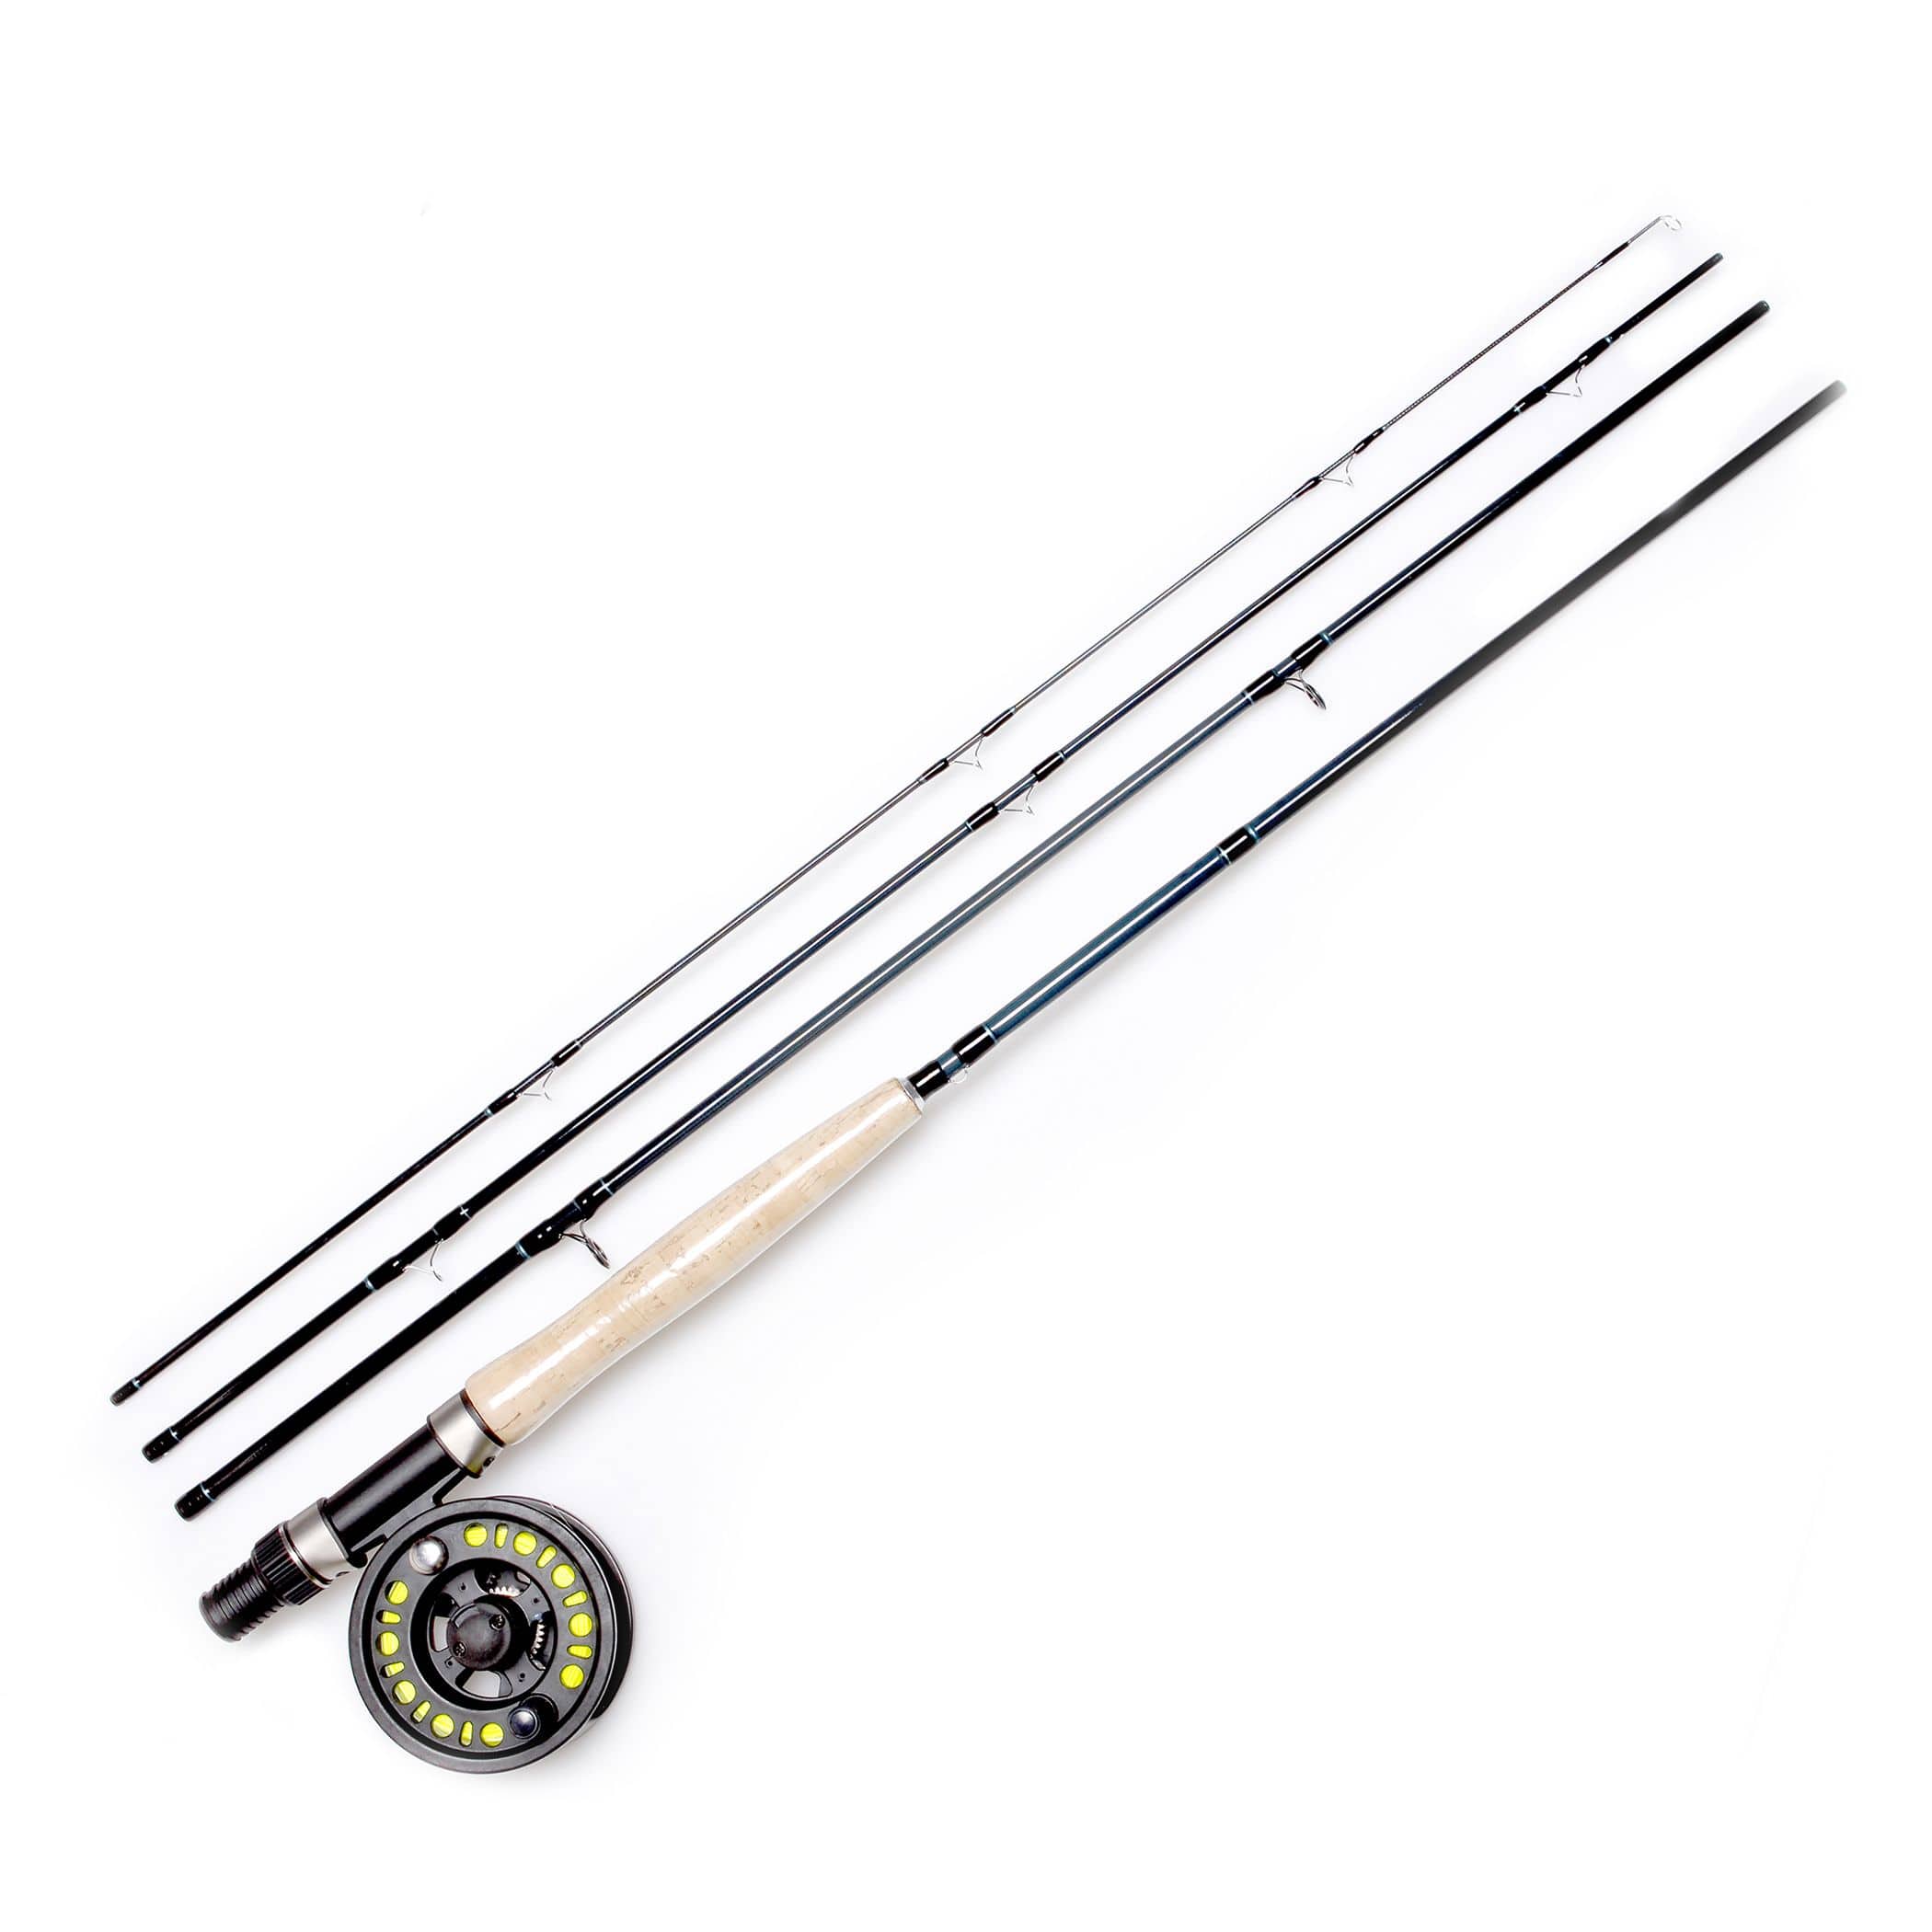 Fly Fishing Rods Reels 5-sections Carbon Rod 5/6 Reels Trout Fishing  Suitable